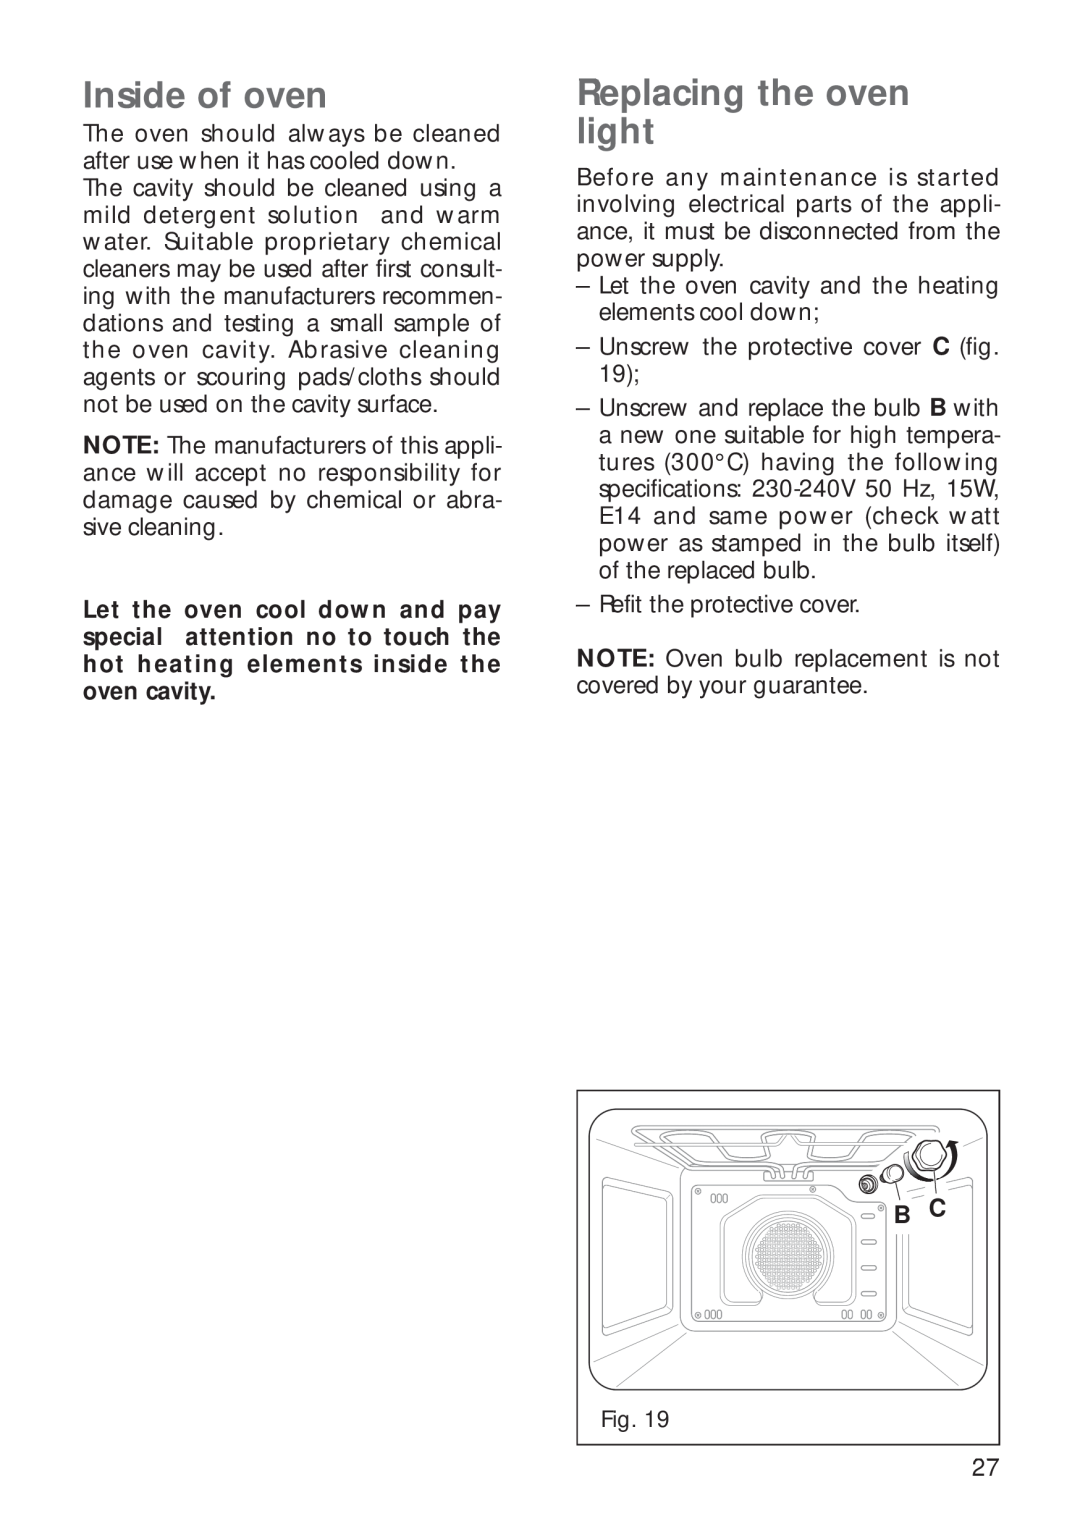 CDA RV 700 installation instructions Inside of oven, Replacing the oven light 